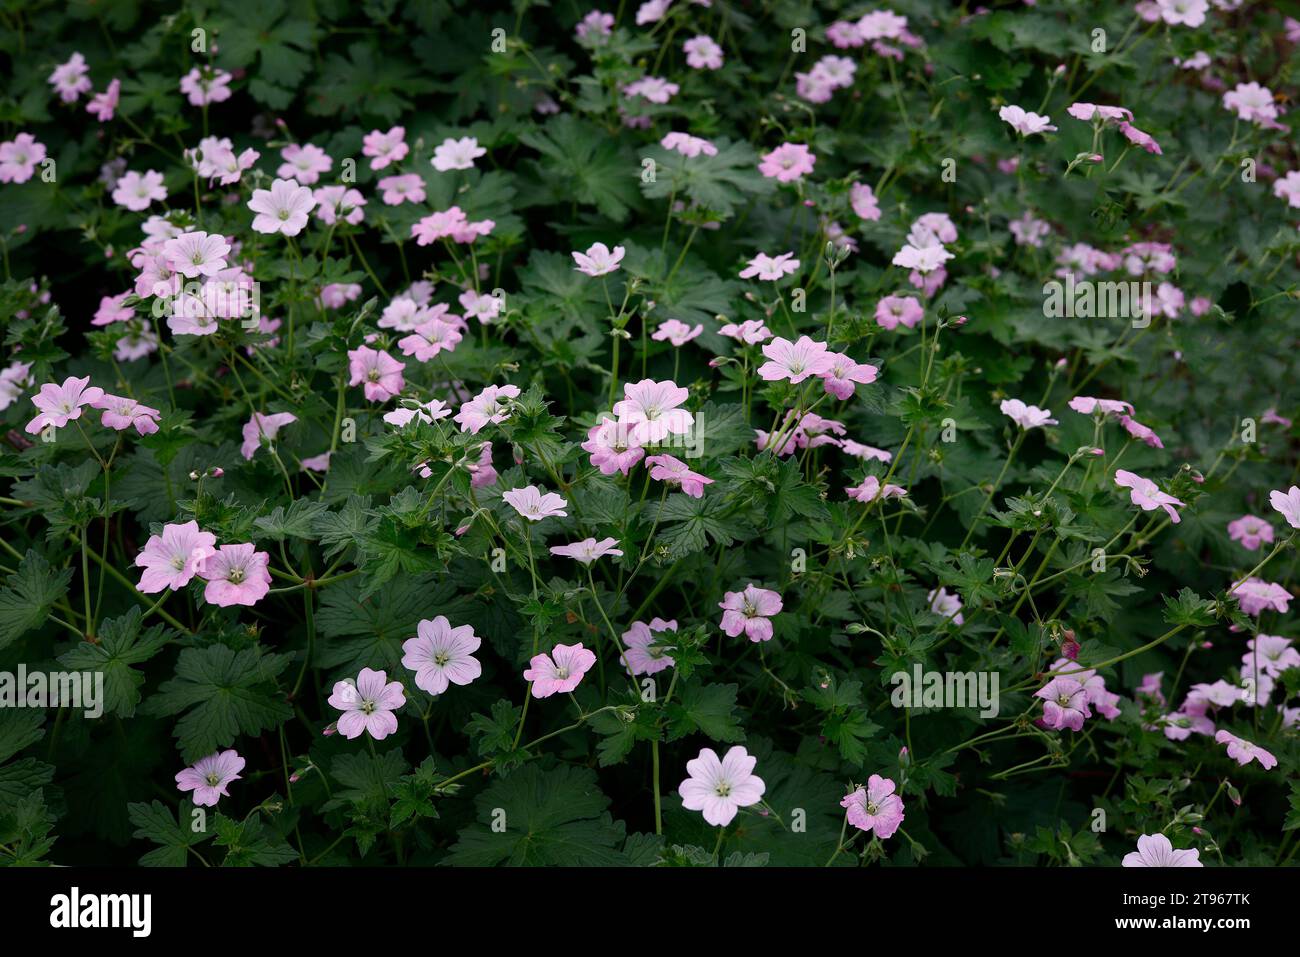 Closeup of the pale pink flowers of the summer long flowering herbaceous perennial garden plant geranium dreamland bremdream. Stock Photo